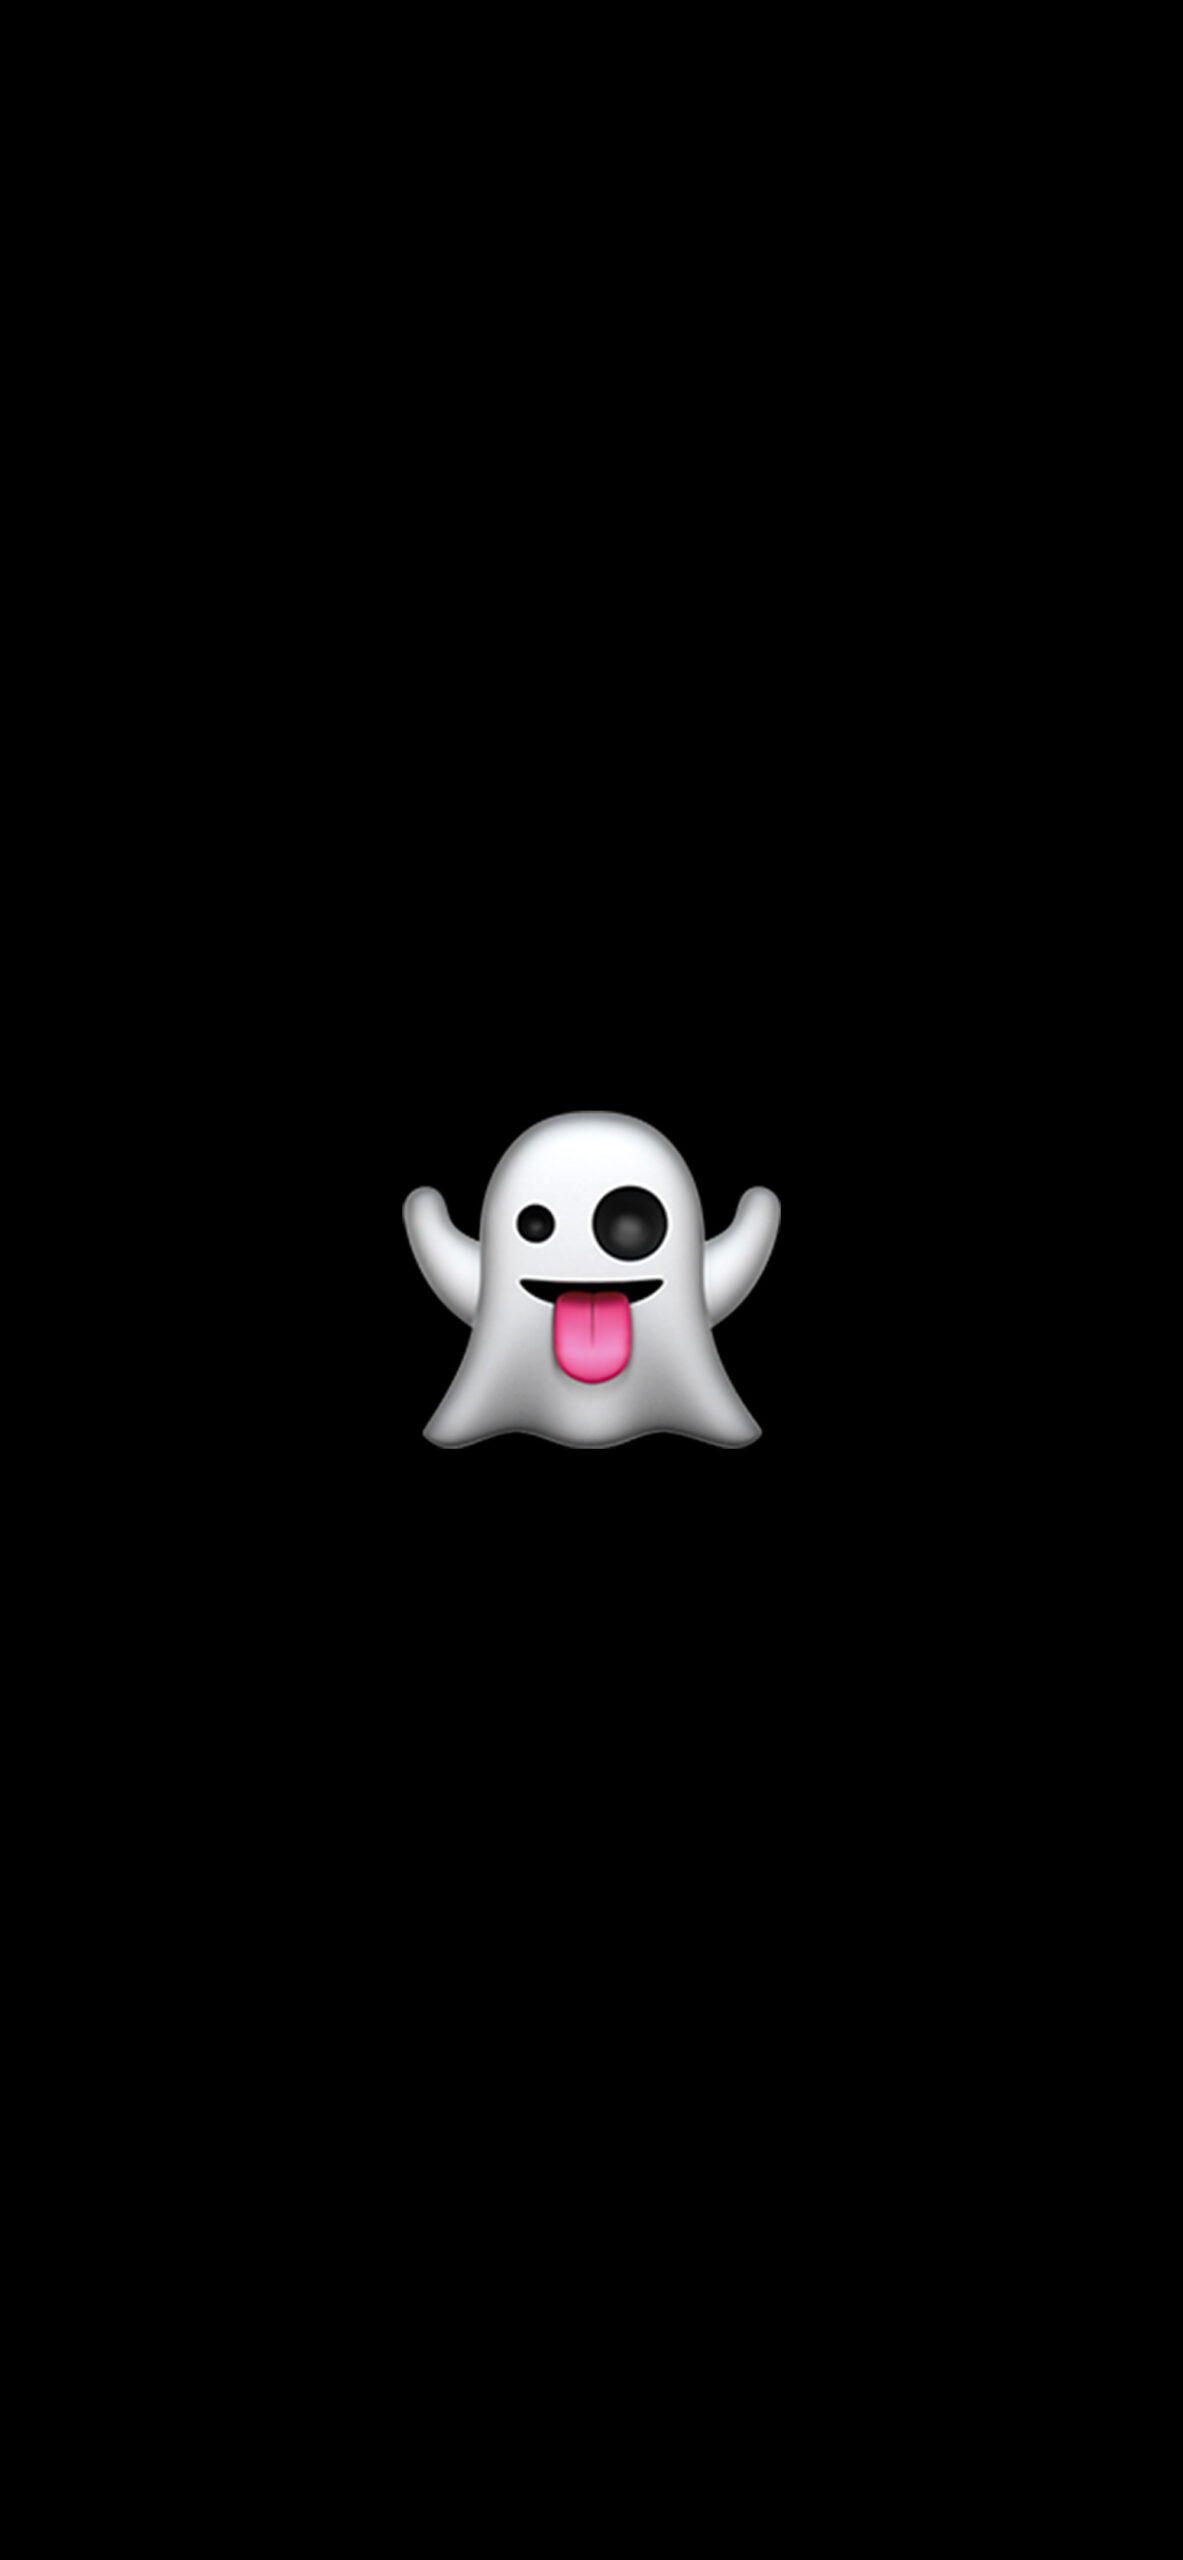 Minimalist Emoji Wallpaper with Ghost, Candle & Castle